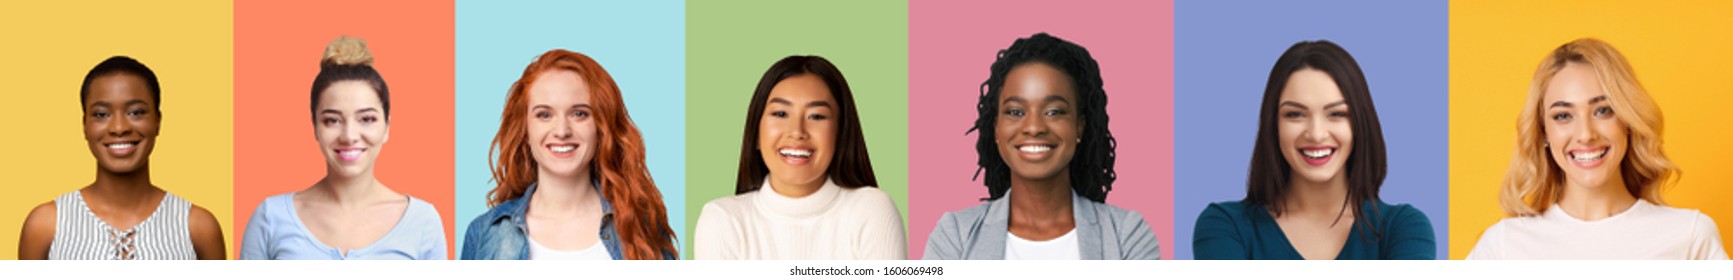 Collage Of Diverse International Young Women Showing Different Emotions Over Colorful Background, Panorama, Beauty Has No Race